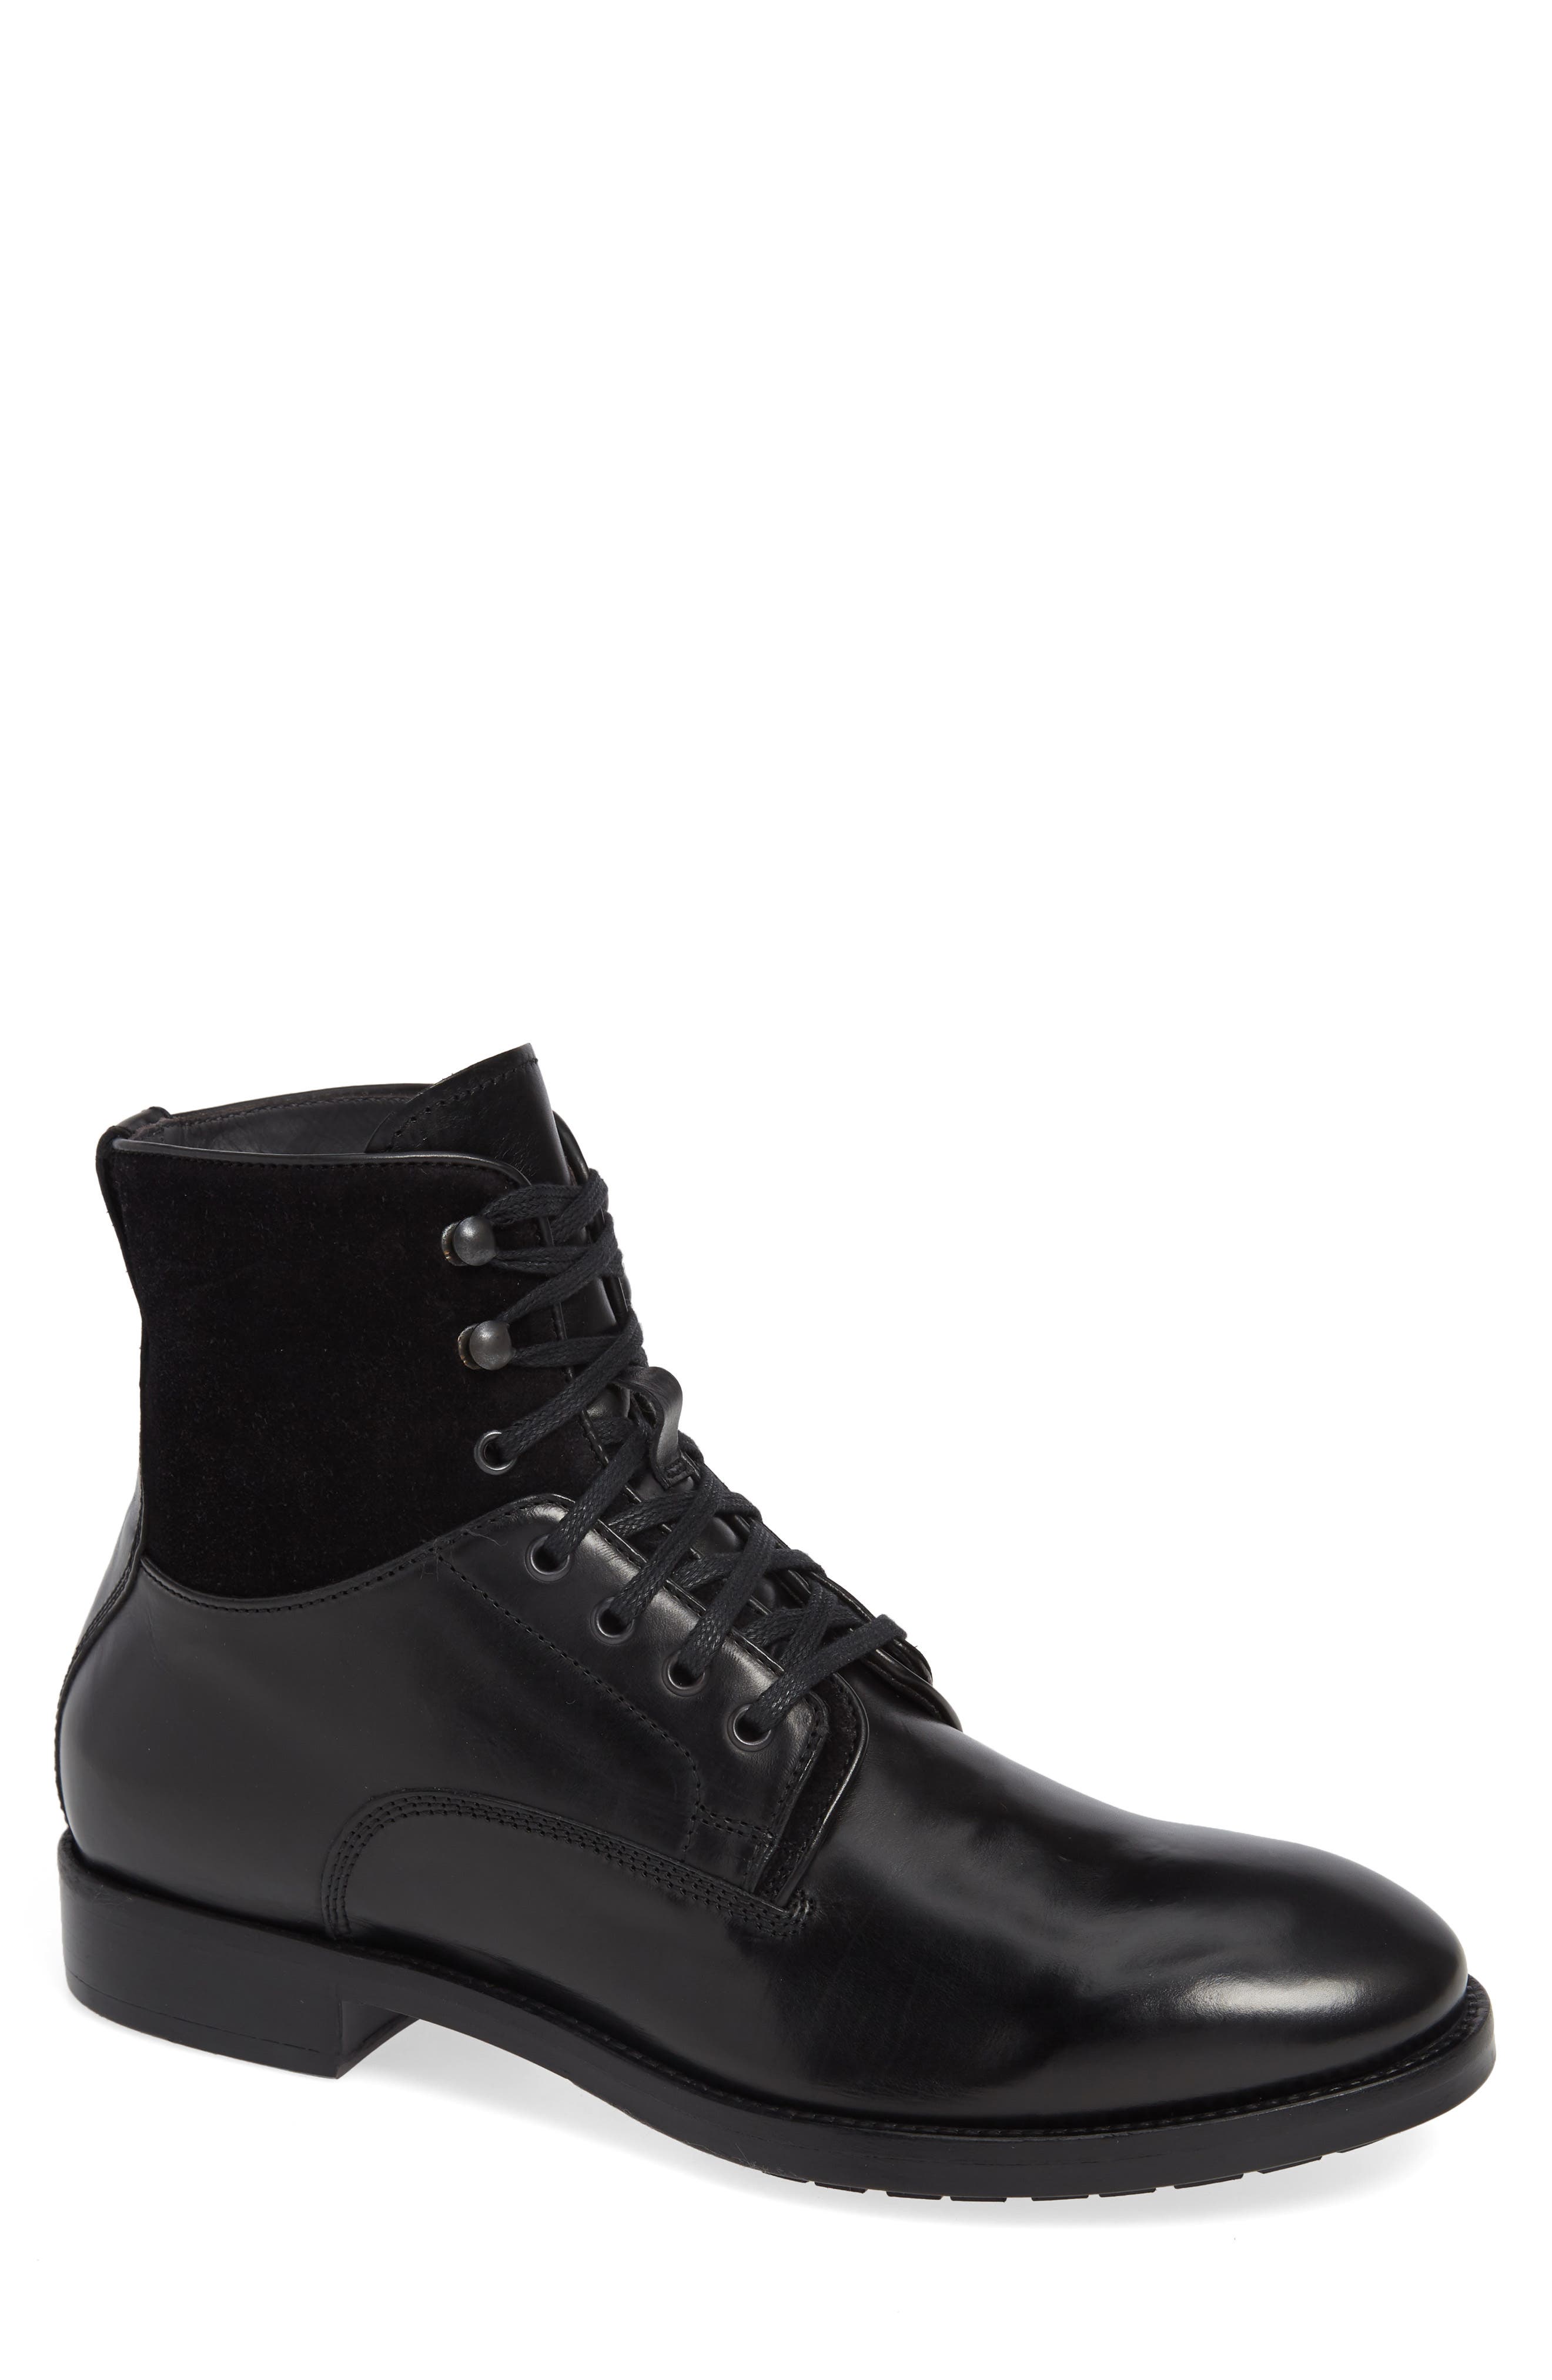 Men's To Boot New York Boots